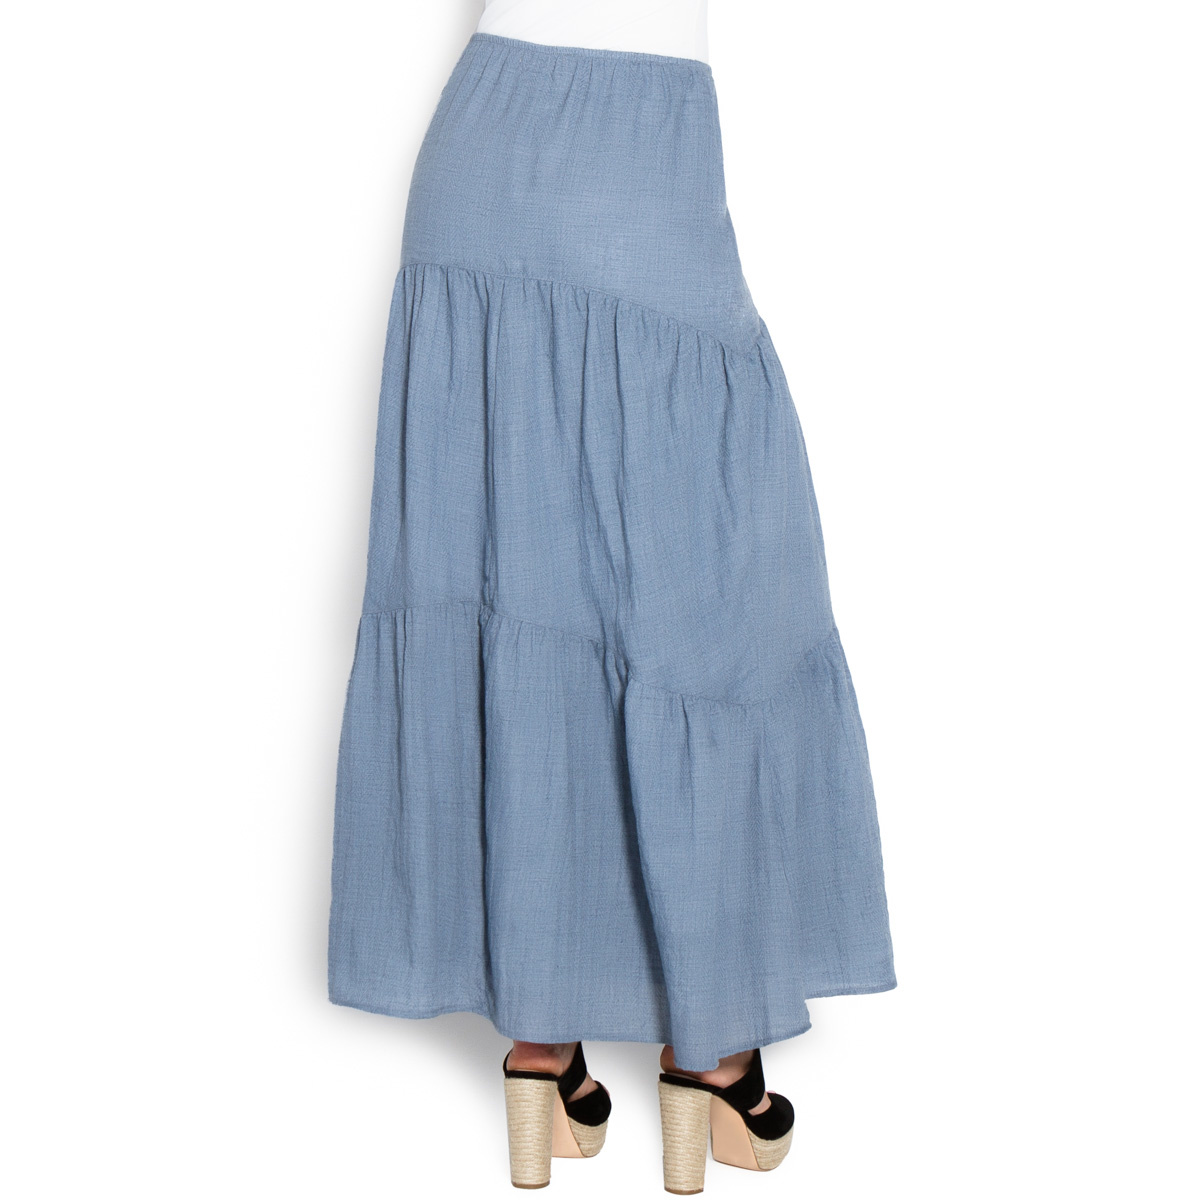 TIERED MAXI SKIRT - ShoeDazzle